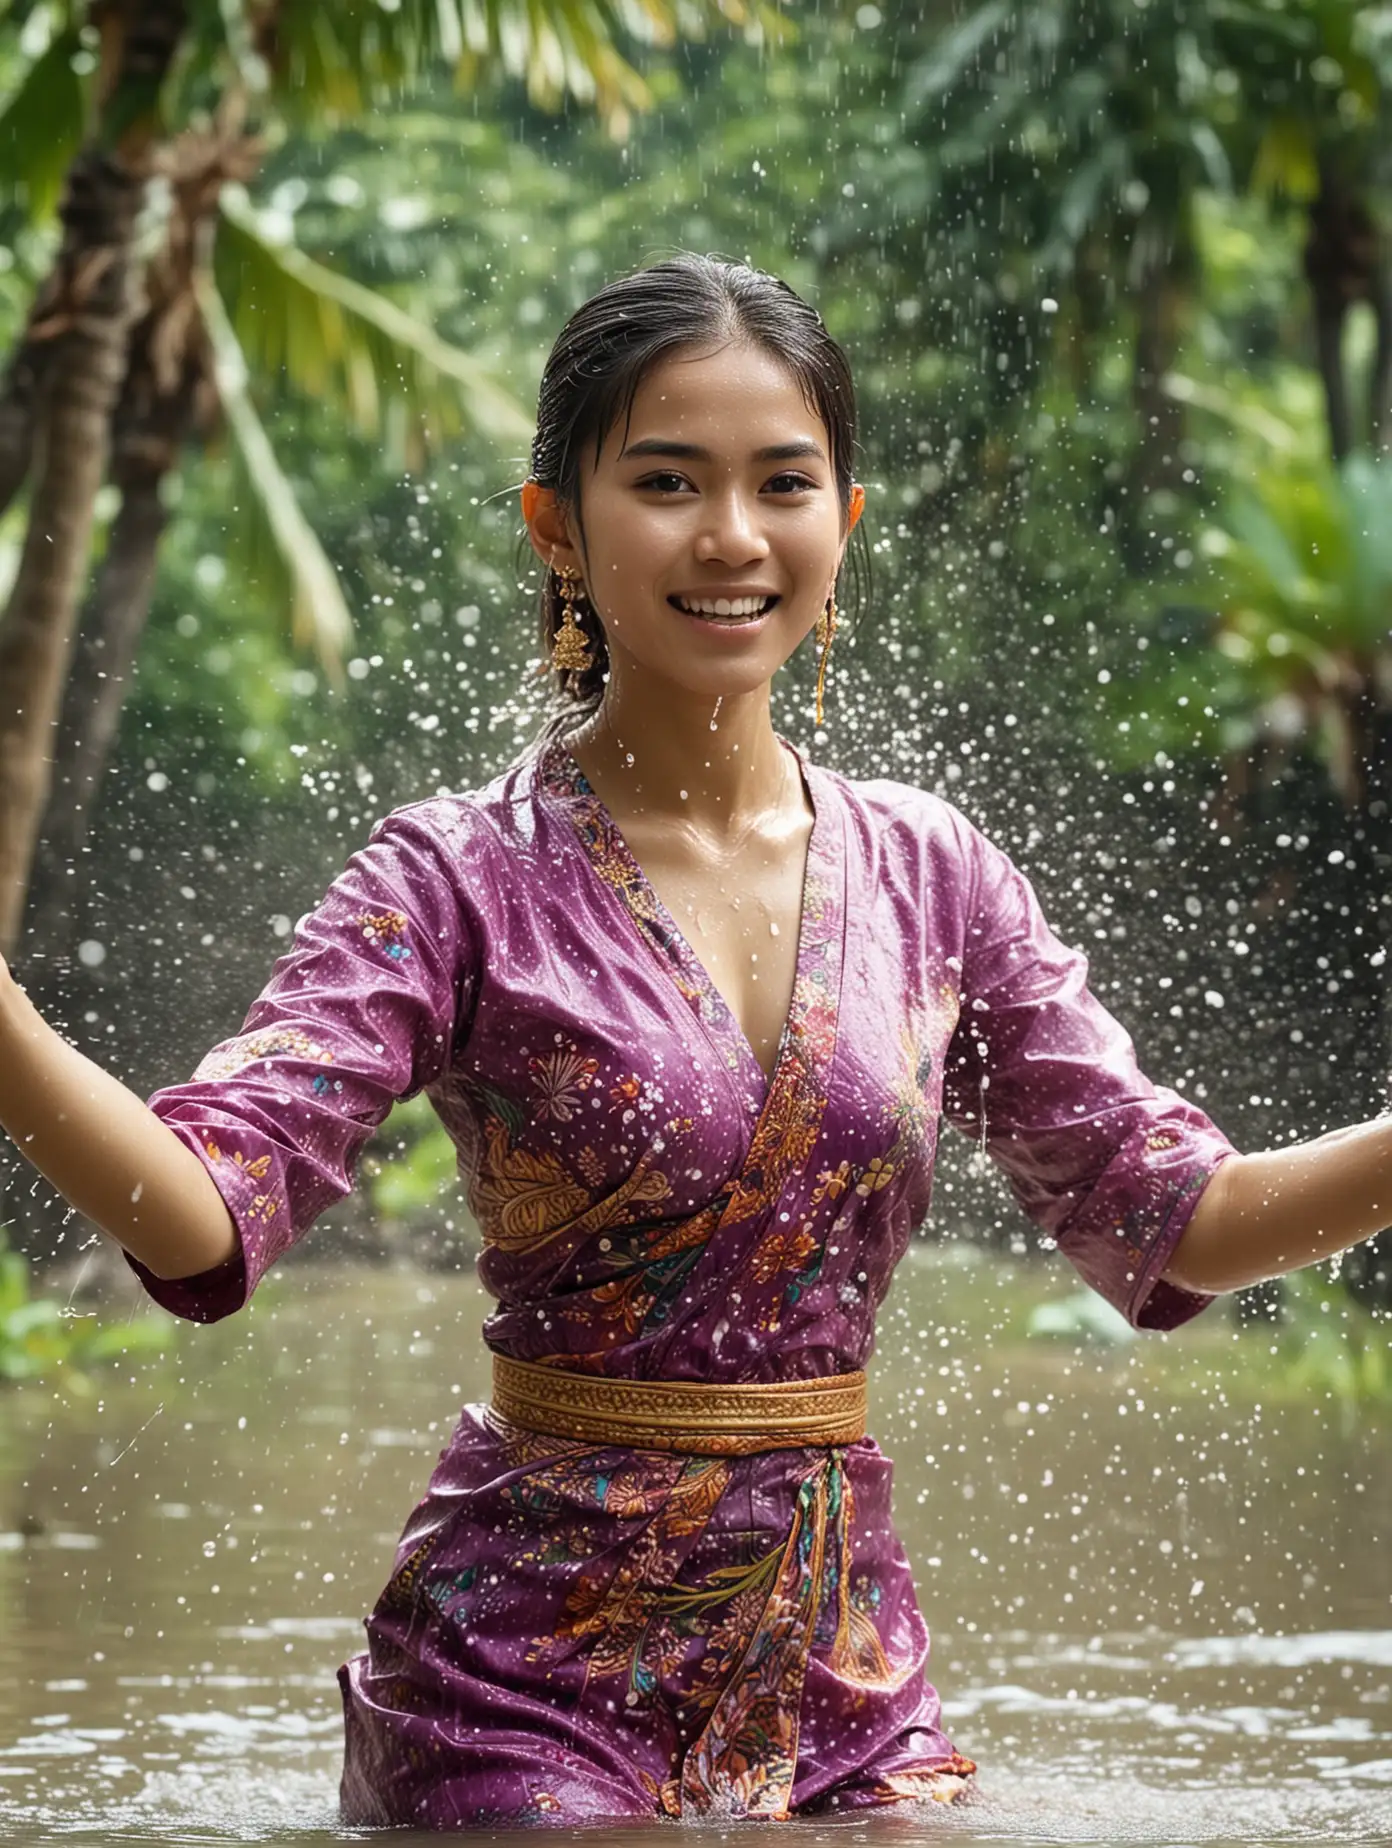 Thai Girl Celebrating Songkran Festival with Traditional Clothes and Water Splash